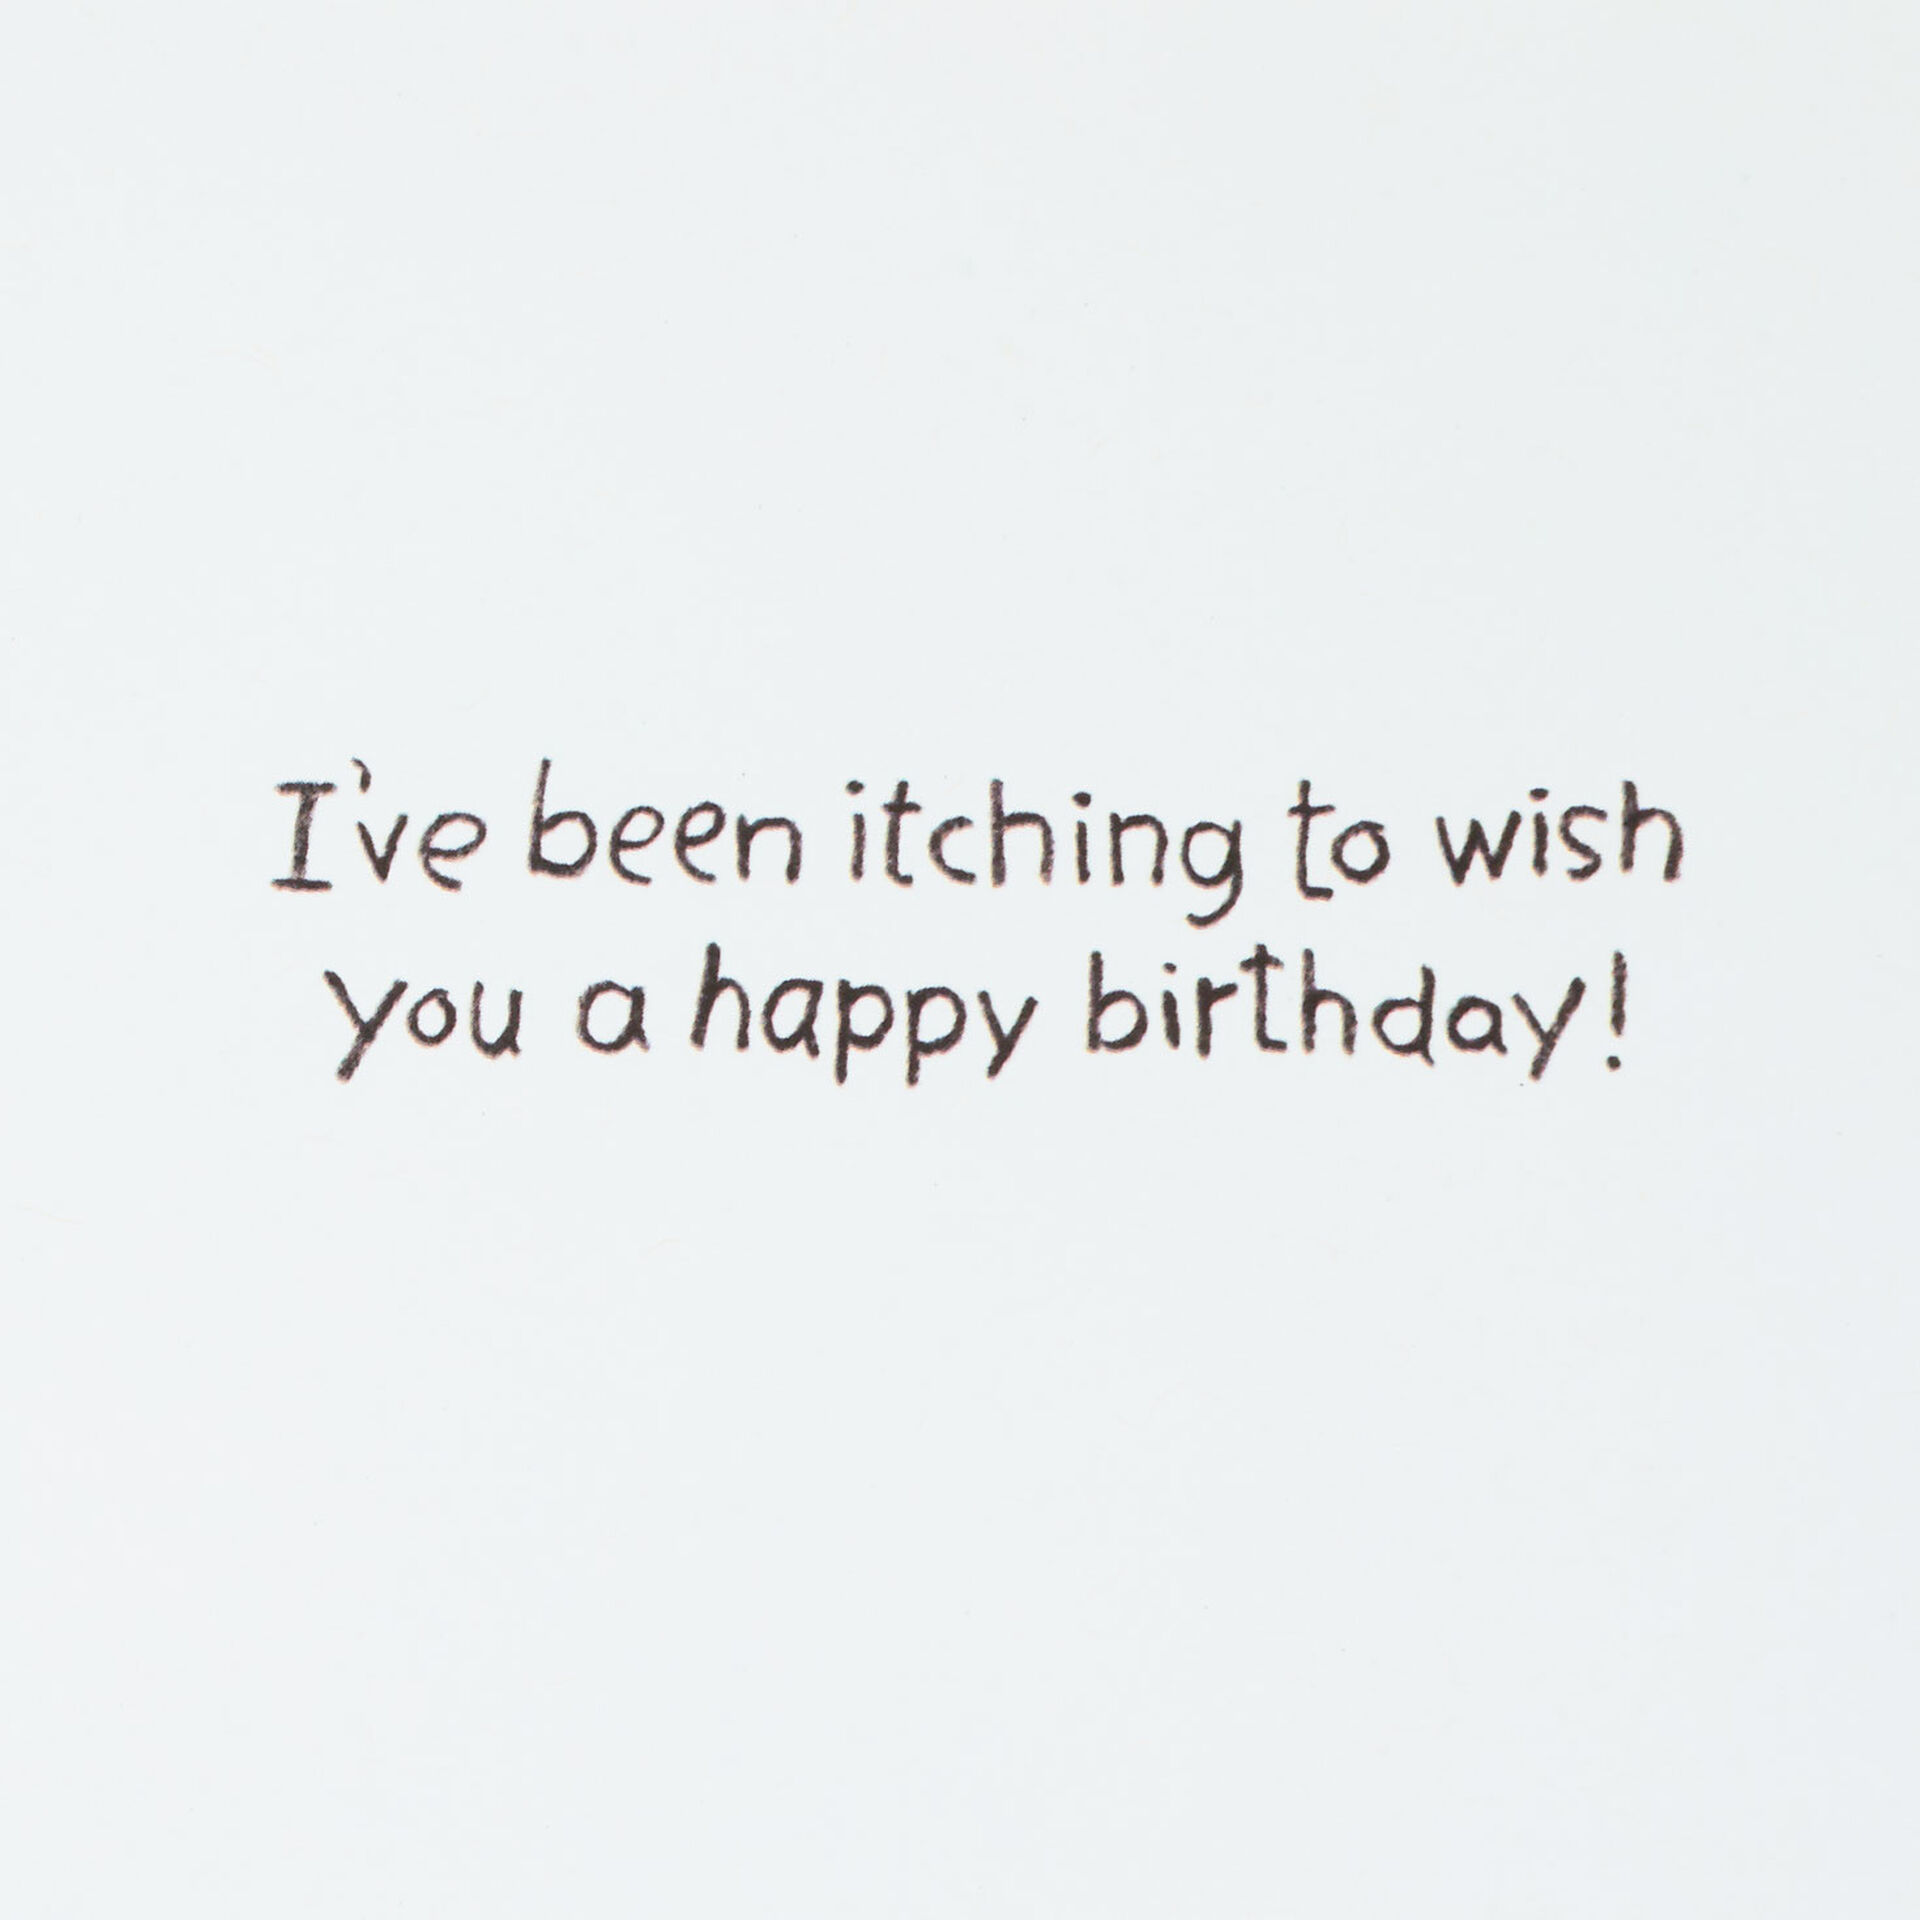 Adam-and-Eve-Poison-Ivy-Itching-Funny-Birthday-Card_399ZZB9972_02